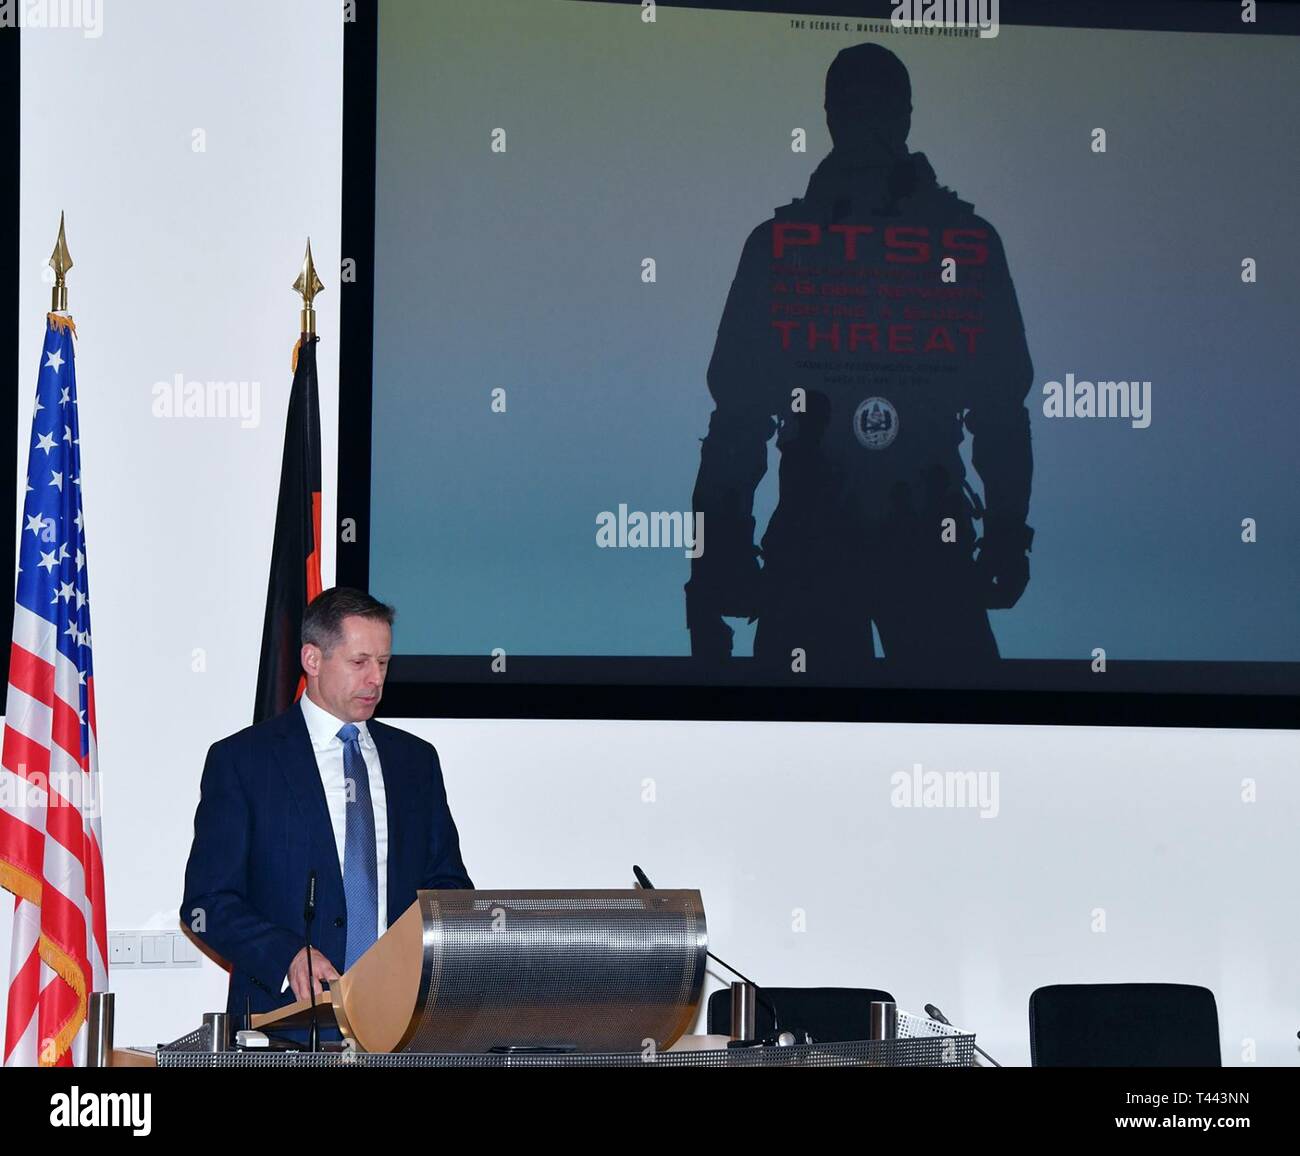 GARMISCH-PARTENKIRCHEN, Germany (March 13, 2019) – Retired U.S. Air Force Brig. Gen. Dieter Bareihs, U.S. deputy director at the George C. Marshall European Center for Security Studies, welcomes 63 participants from 47 countries to the Program on Terrorism and Security Studies March 13. Stock Photo